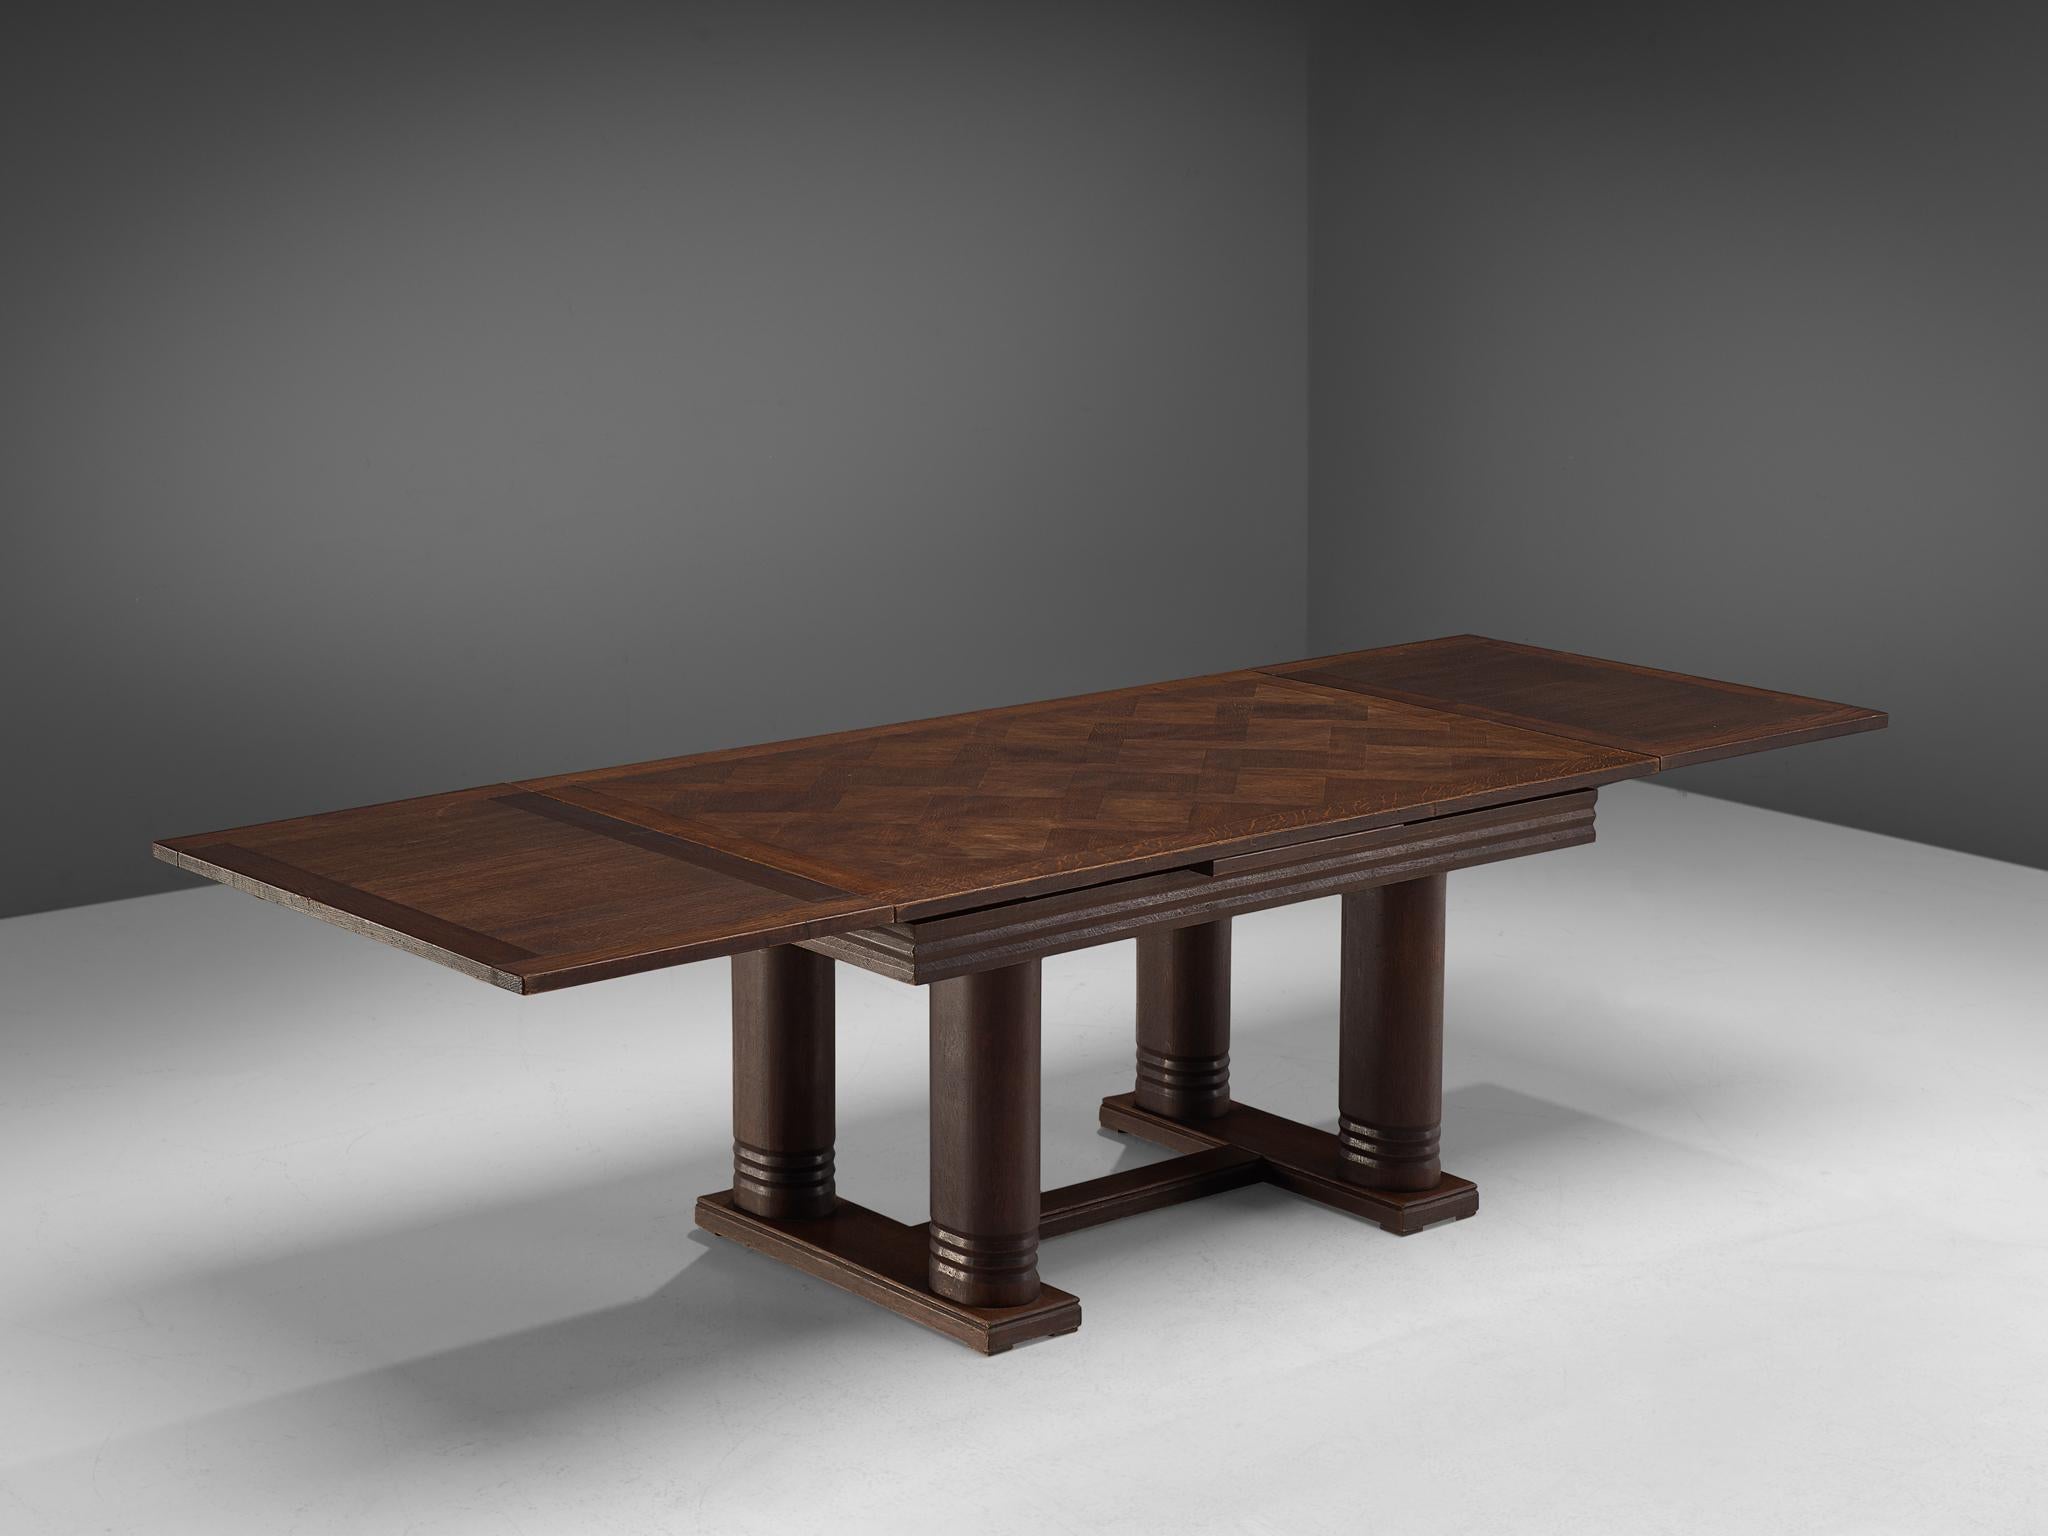 Charles Dudouyt, dining table, oak, France, 1940s.

Majestic centre table in dark brown oak.
This Art Deco table shows the great craftsmanship of Charles Dudouyt. The tabletop in inlayed with different pieces of wood, creating a beautiful pattern